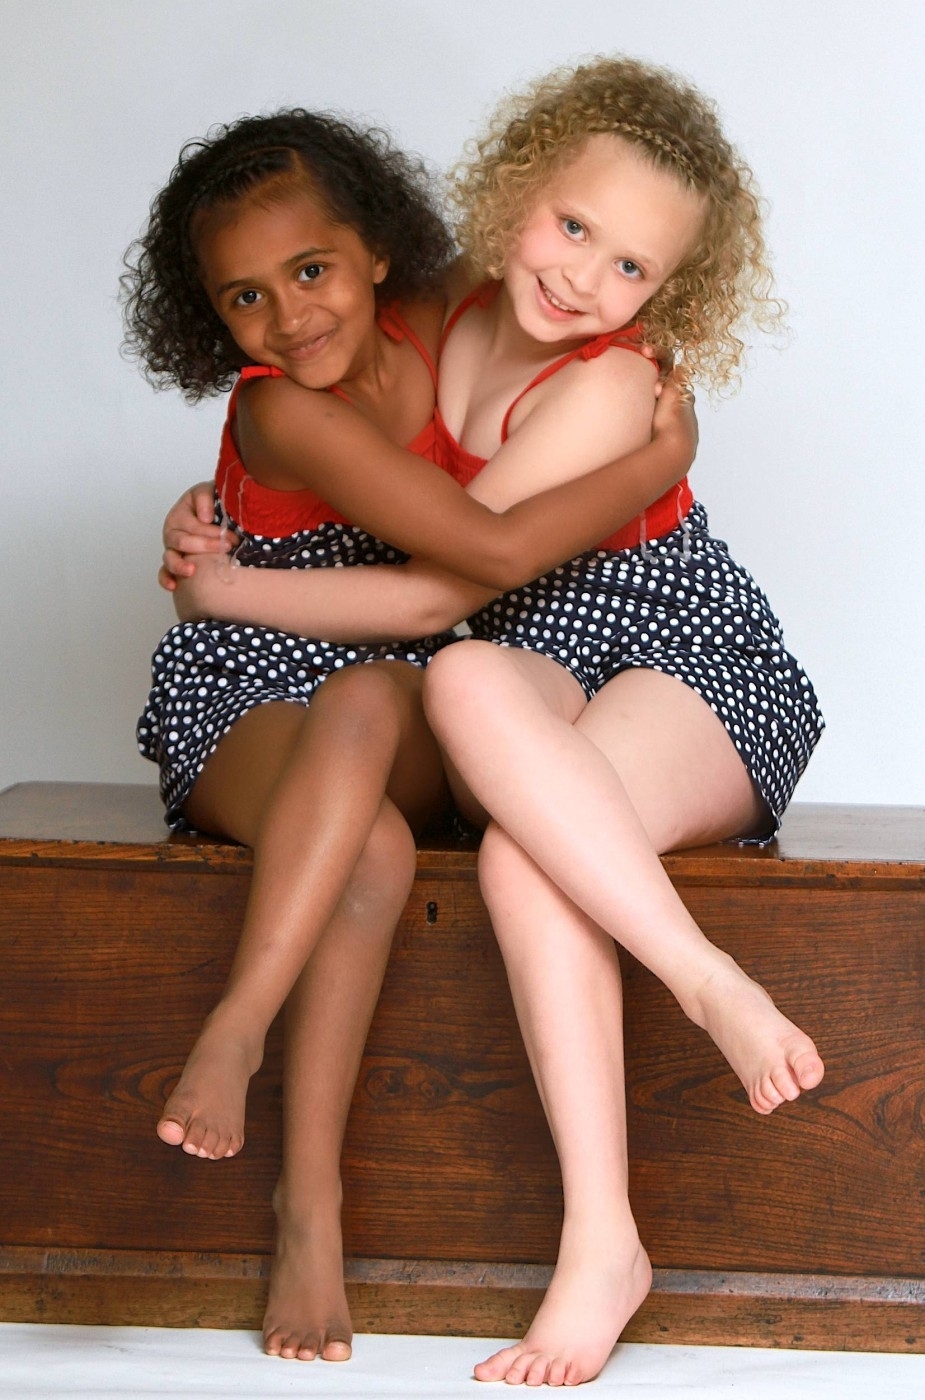 Twins Kian and Remee. Born a minute apart  one black, one white, due to the rare combination of their parents genes, both parents have a white mother and a black father. They have just turned 7.